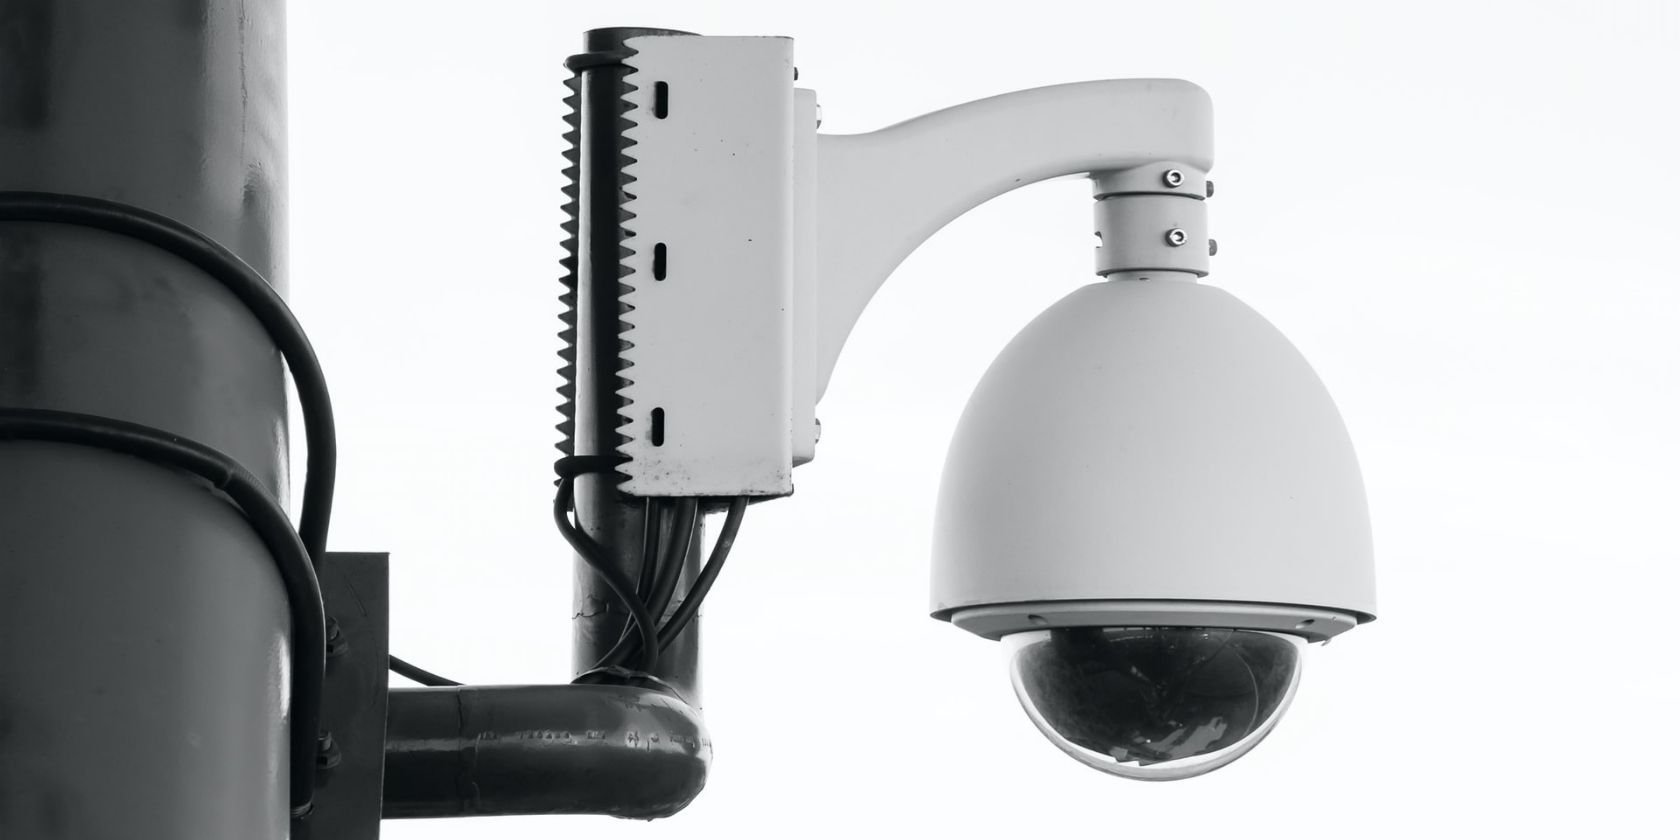 a round white security camera attached to a pole